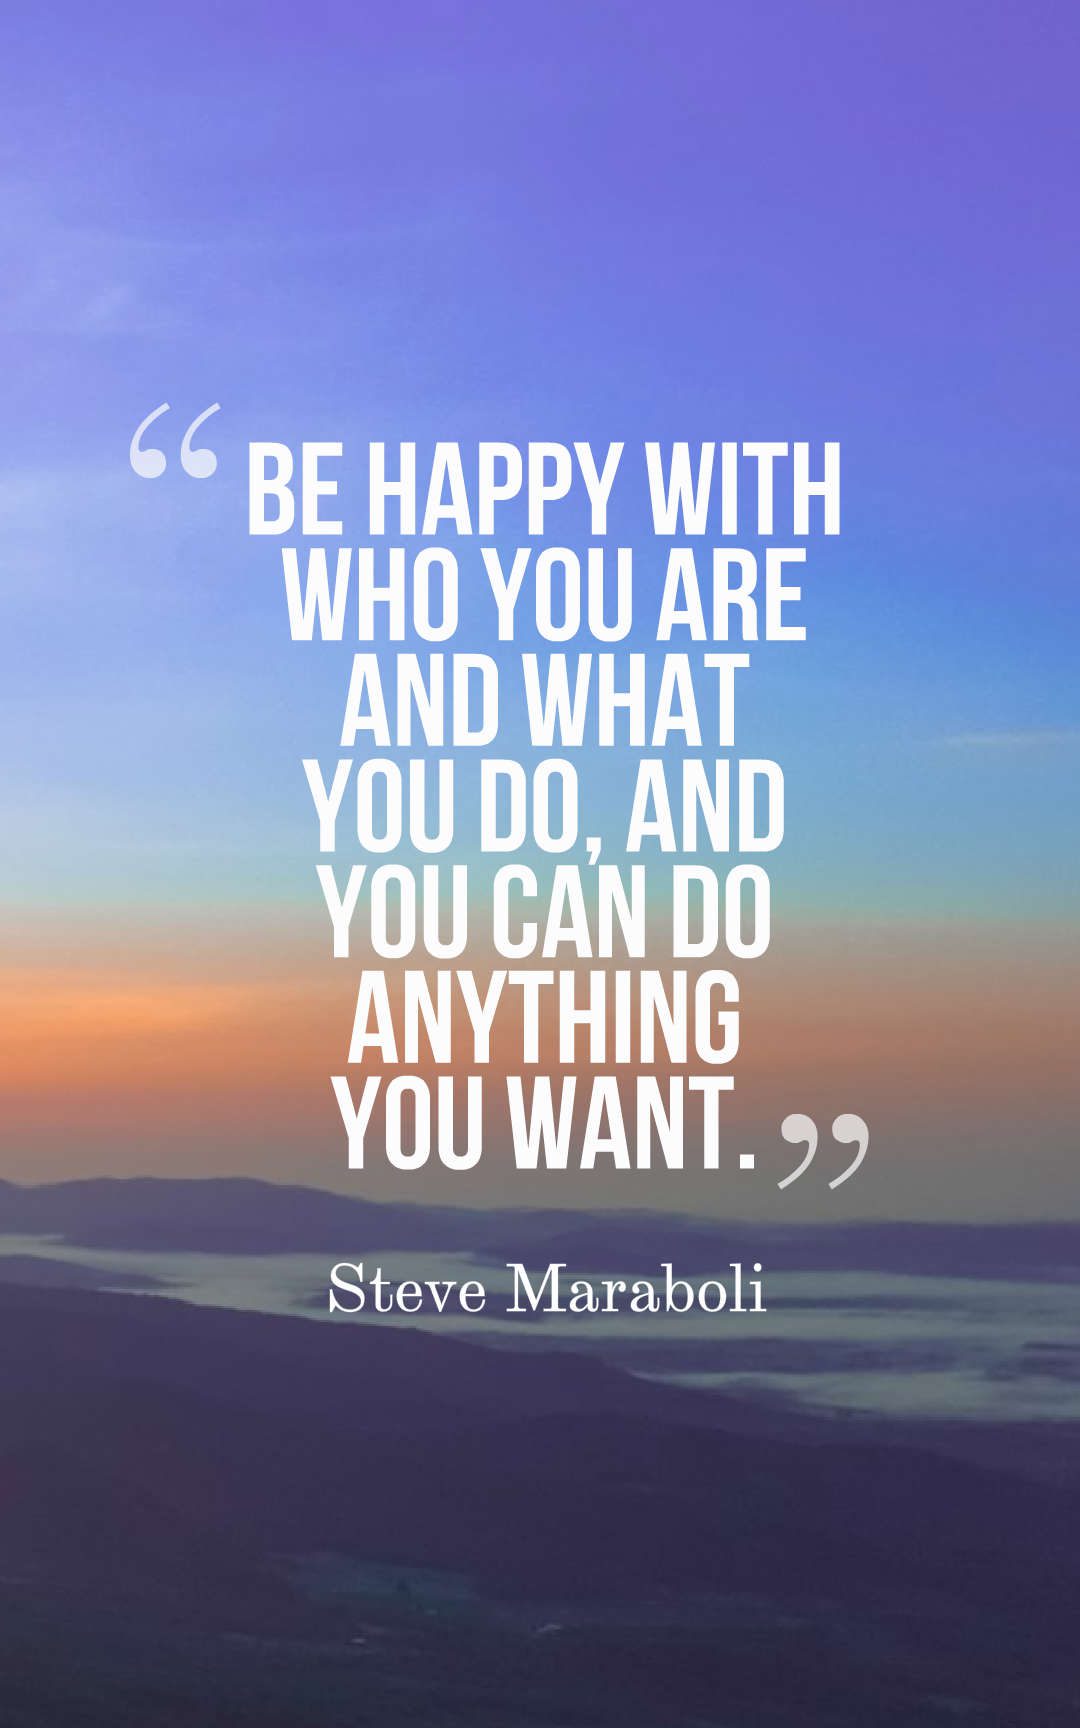 Be happy with who you are and what you do, and you can do anything you want.